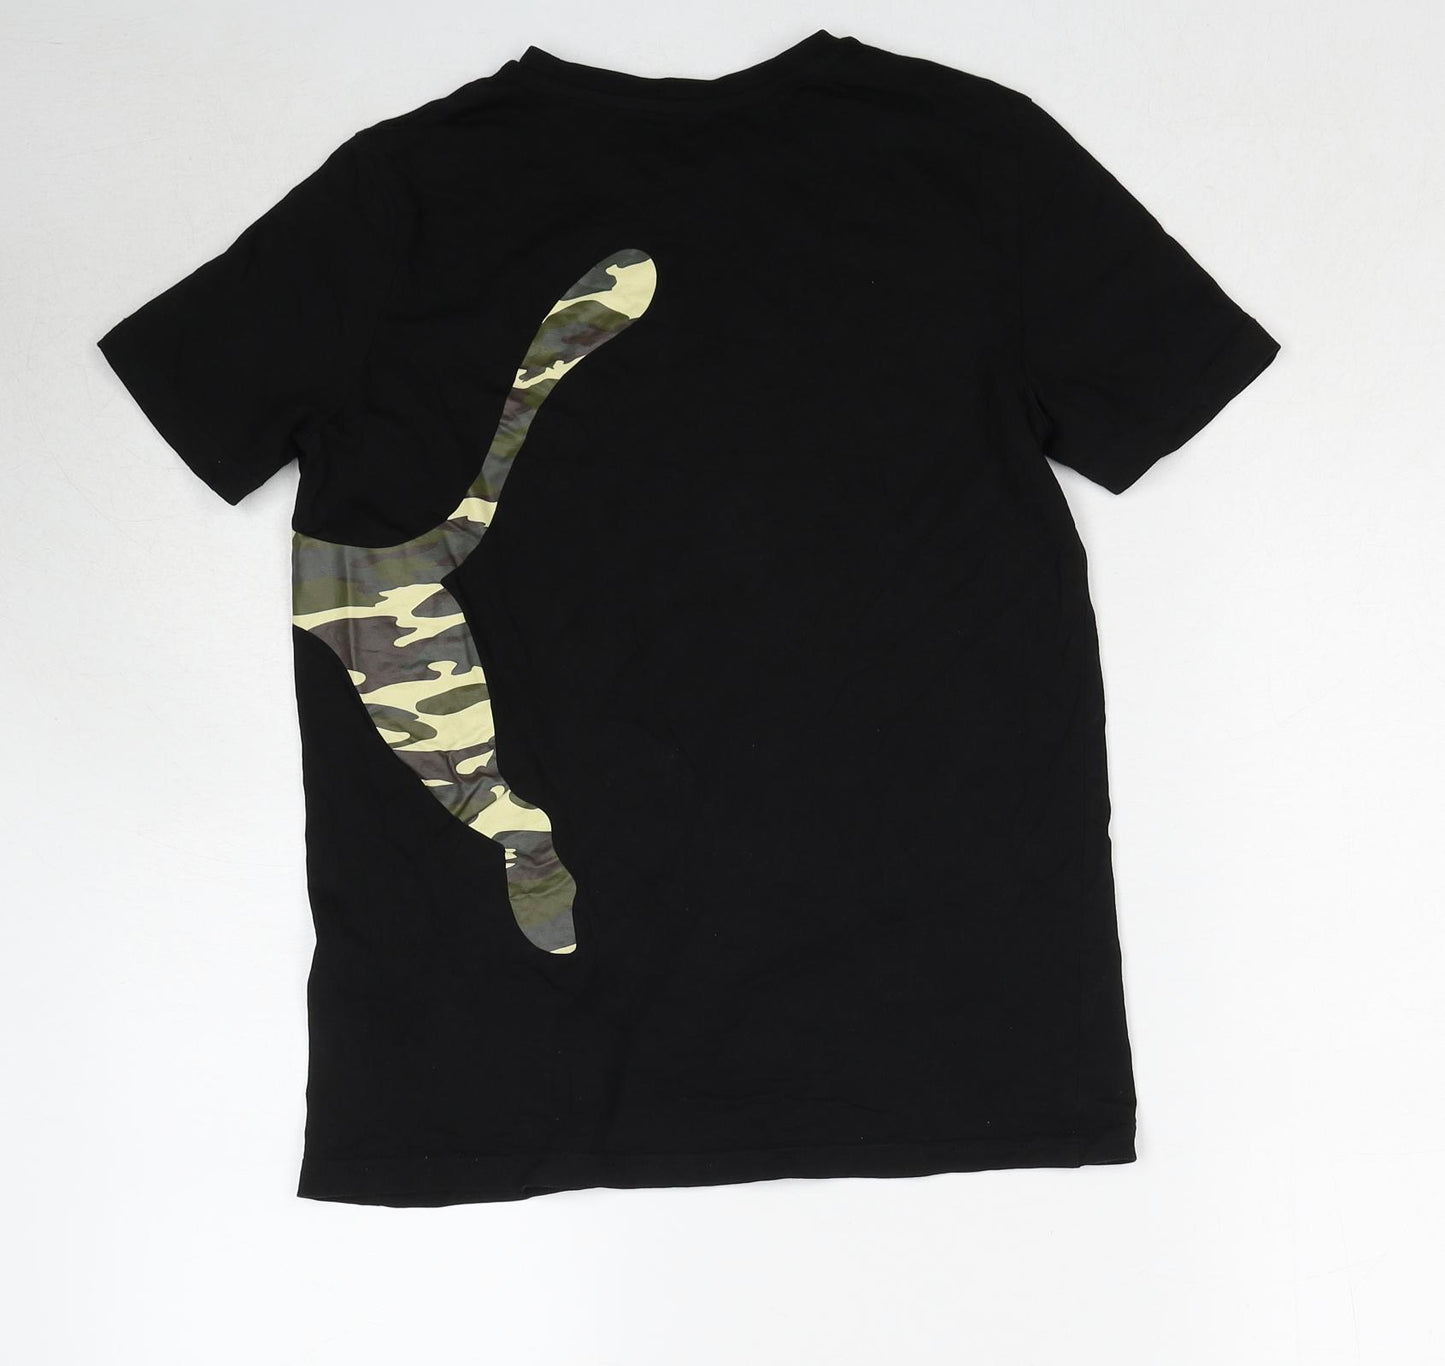 PUMA Boys Black Camouflage Cotton Pullover T-Shirt Size 13-14 Years Crew Neck Pullover